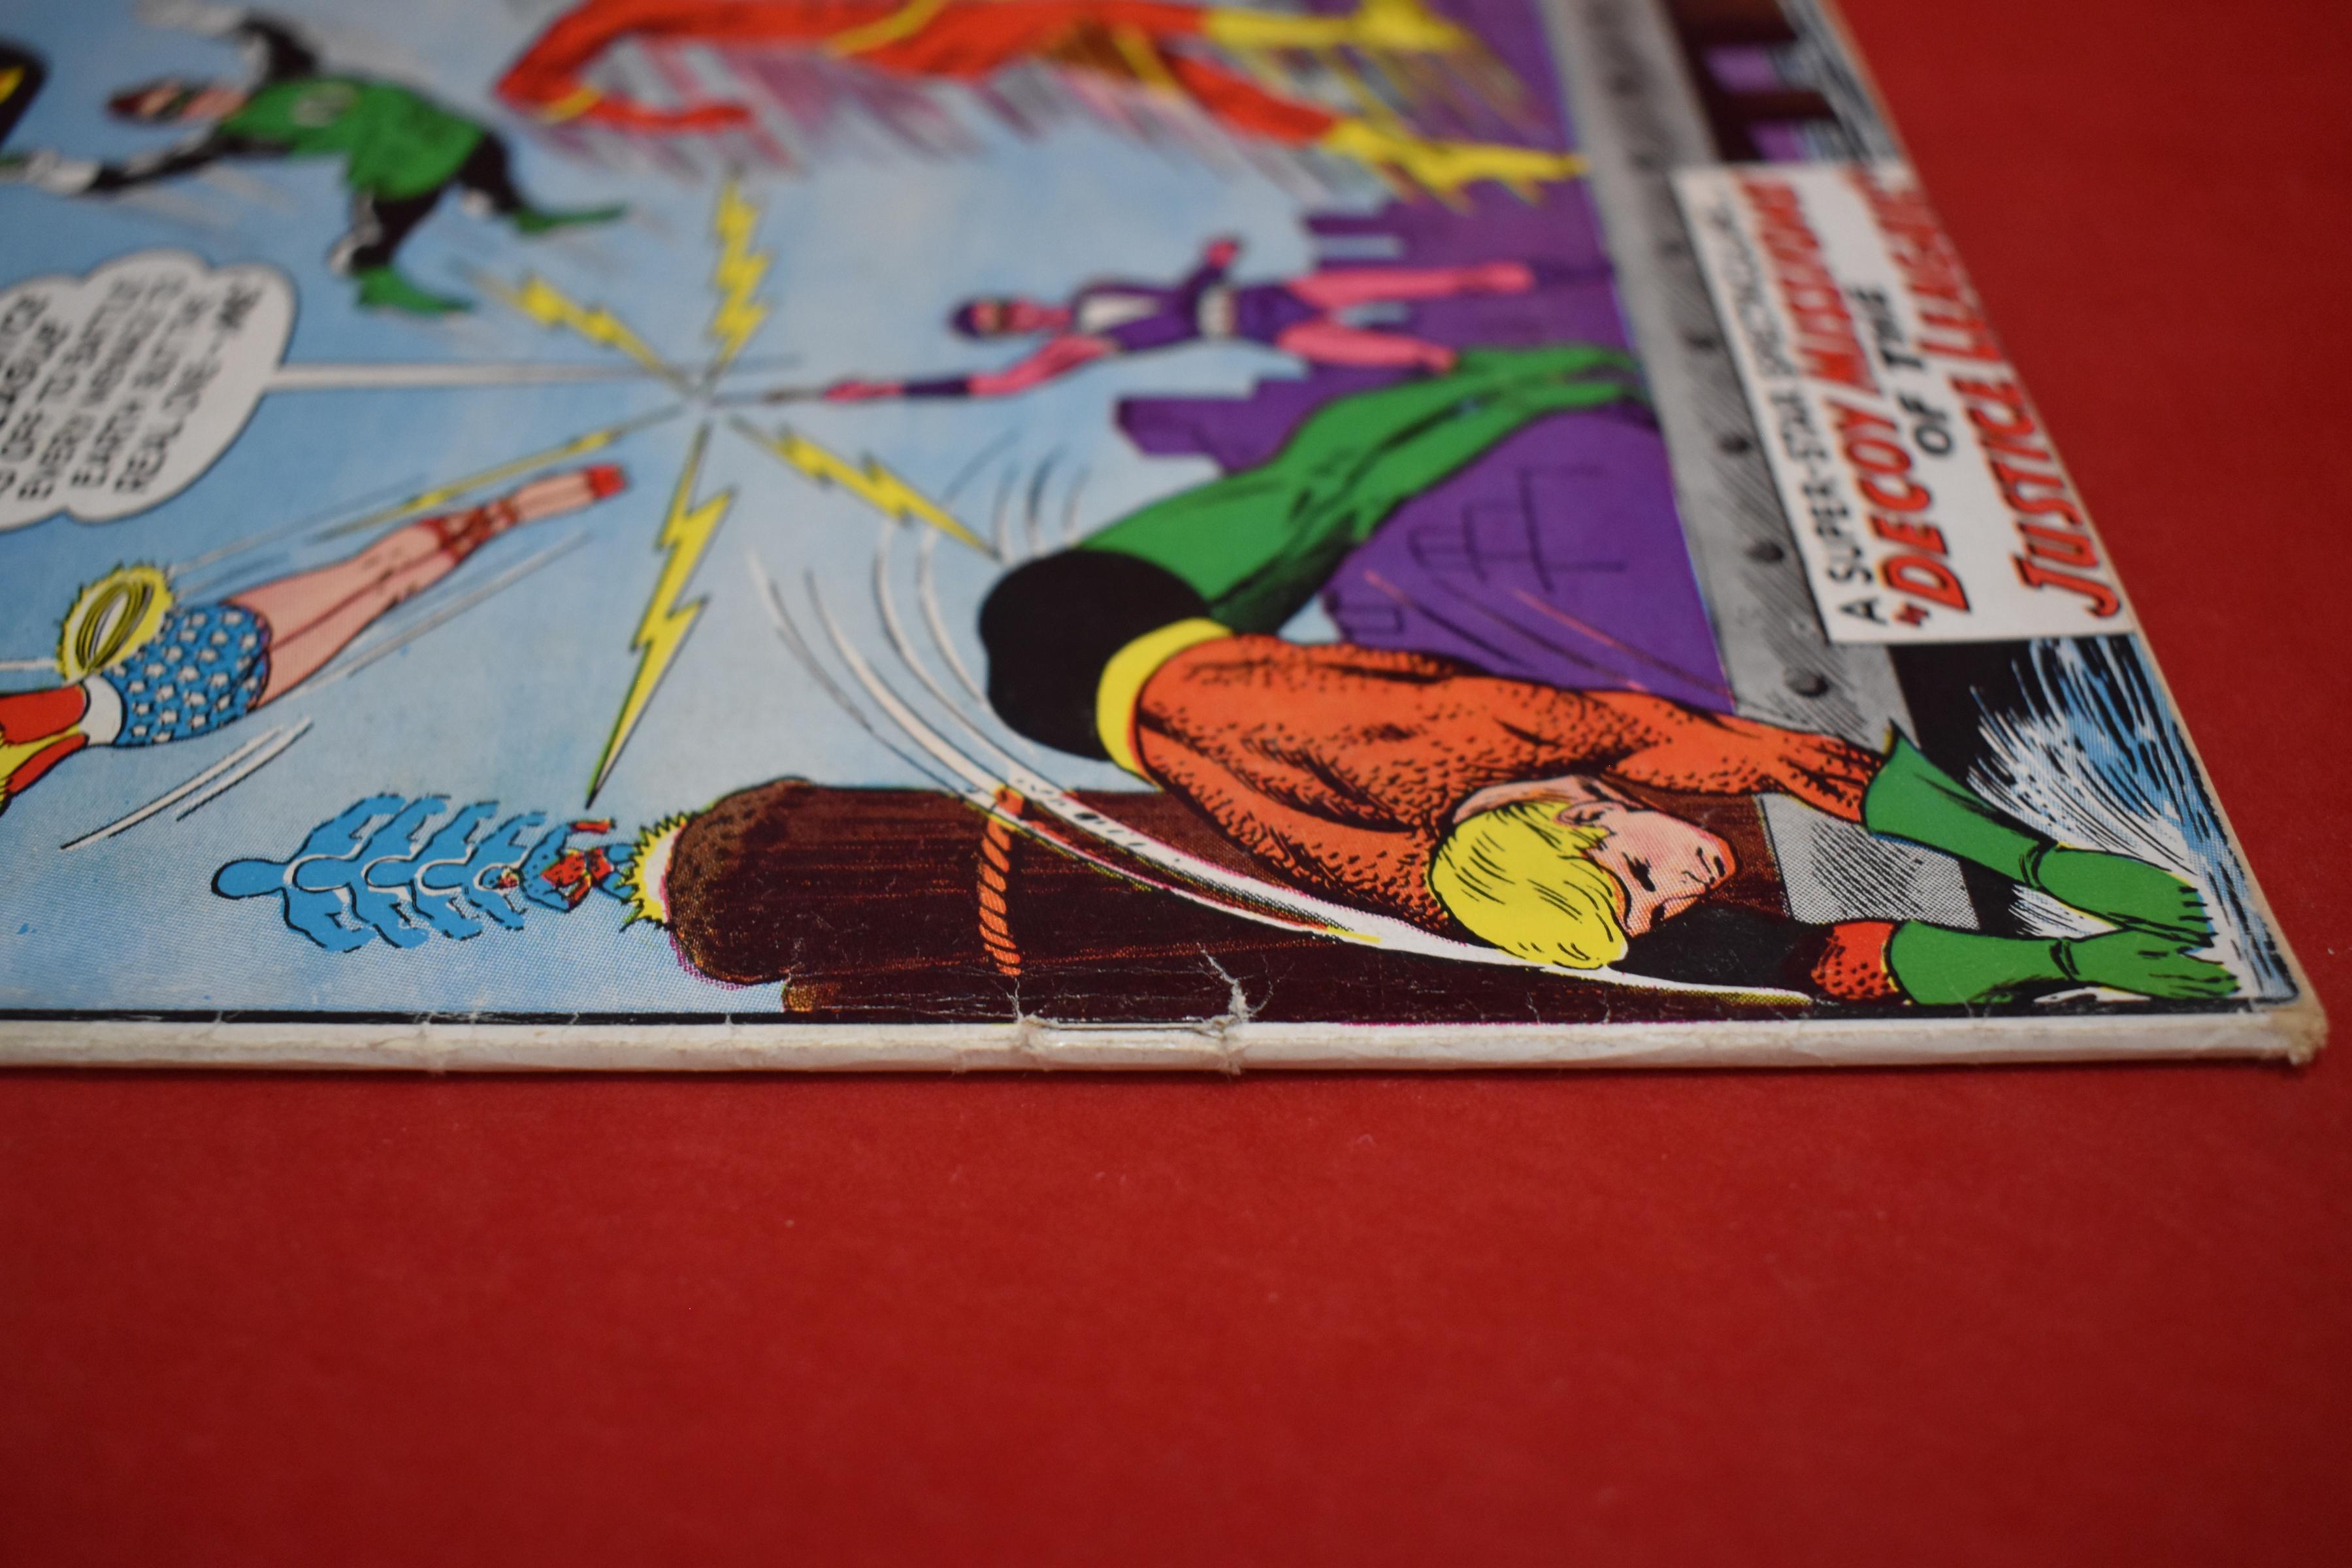 JUSTICE LEAGUE #24 | DECOY MISSIONS OF THE JUSTICE LEAGUE! | SEKOWSKY - 1963! | *BOTTOM STAPLE*